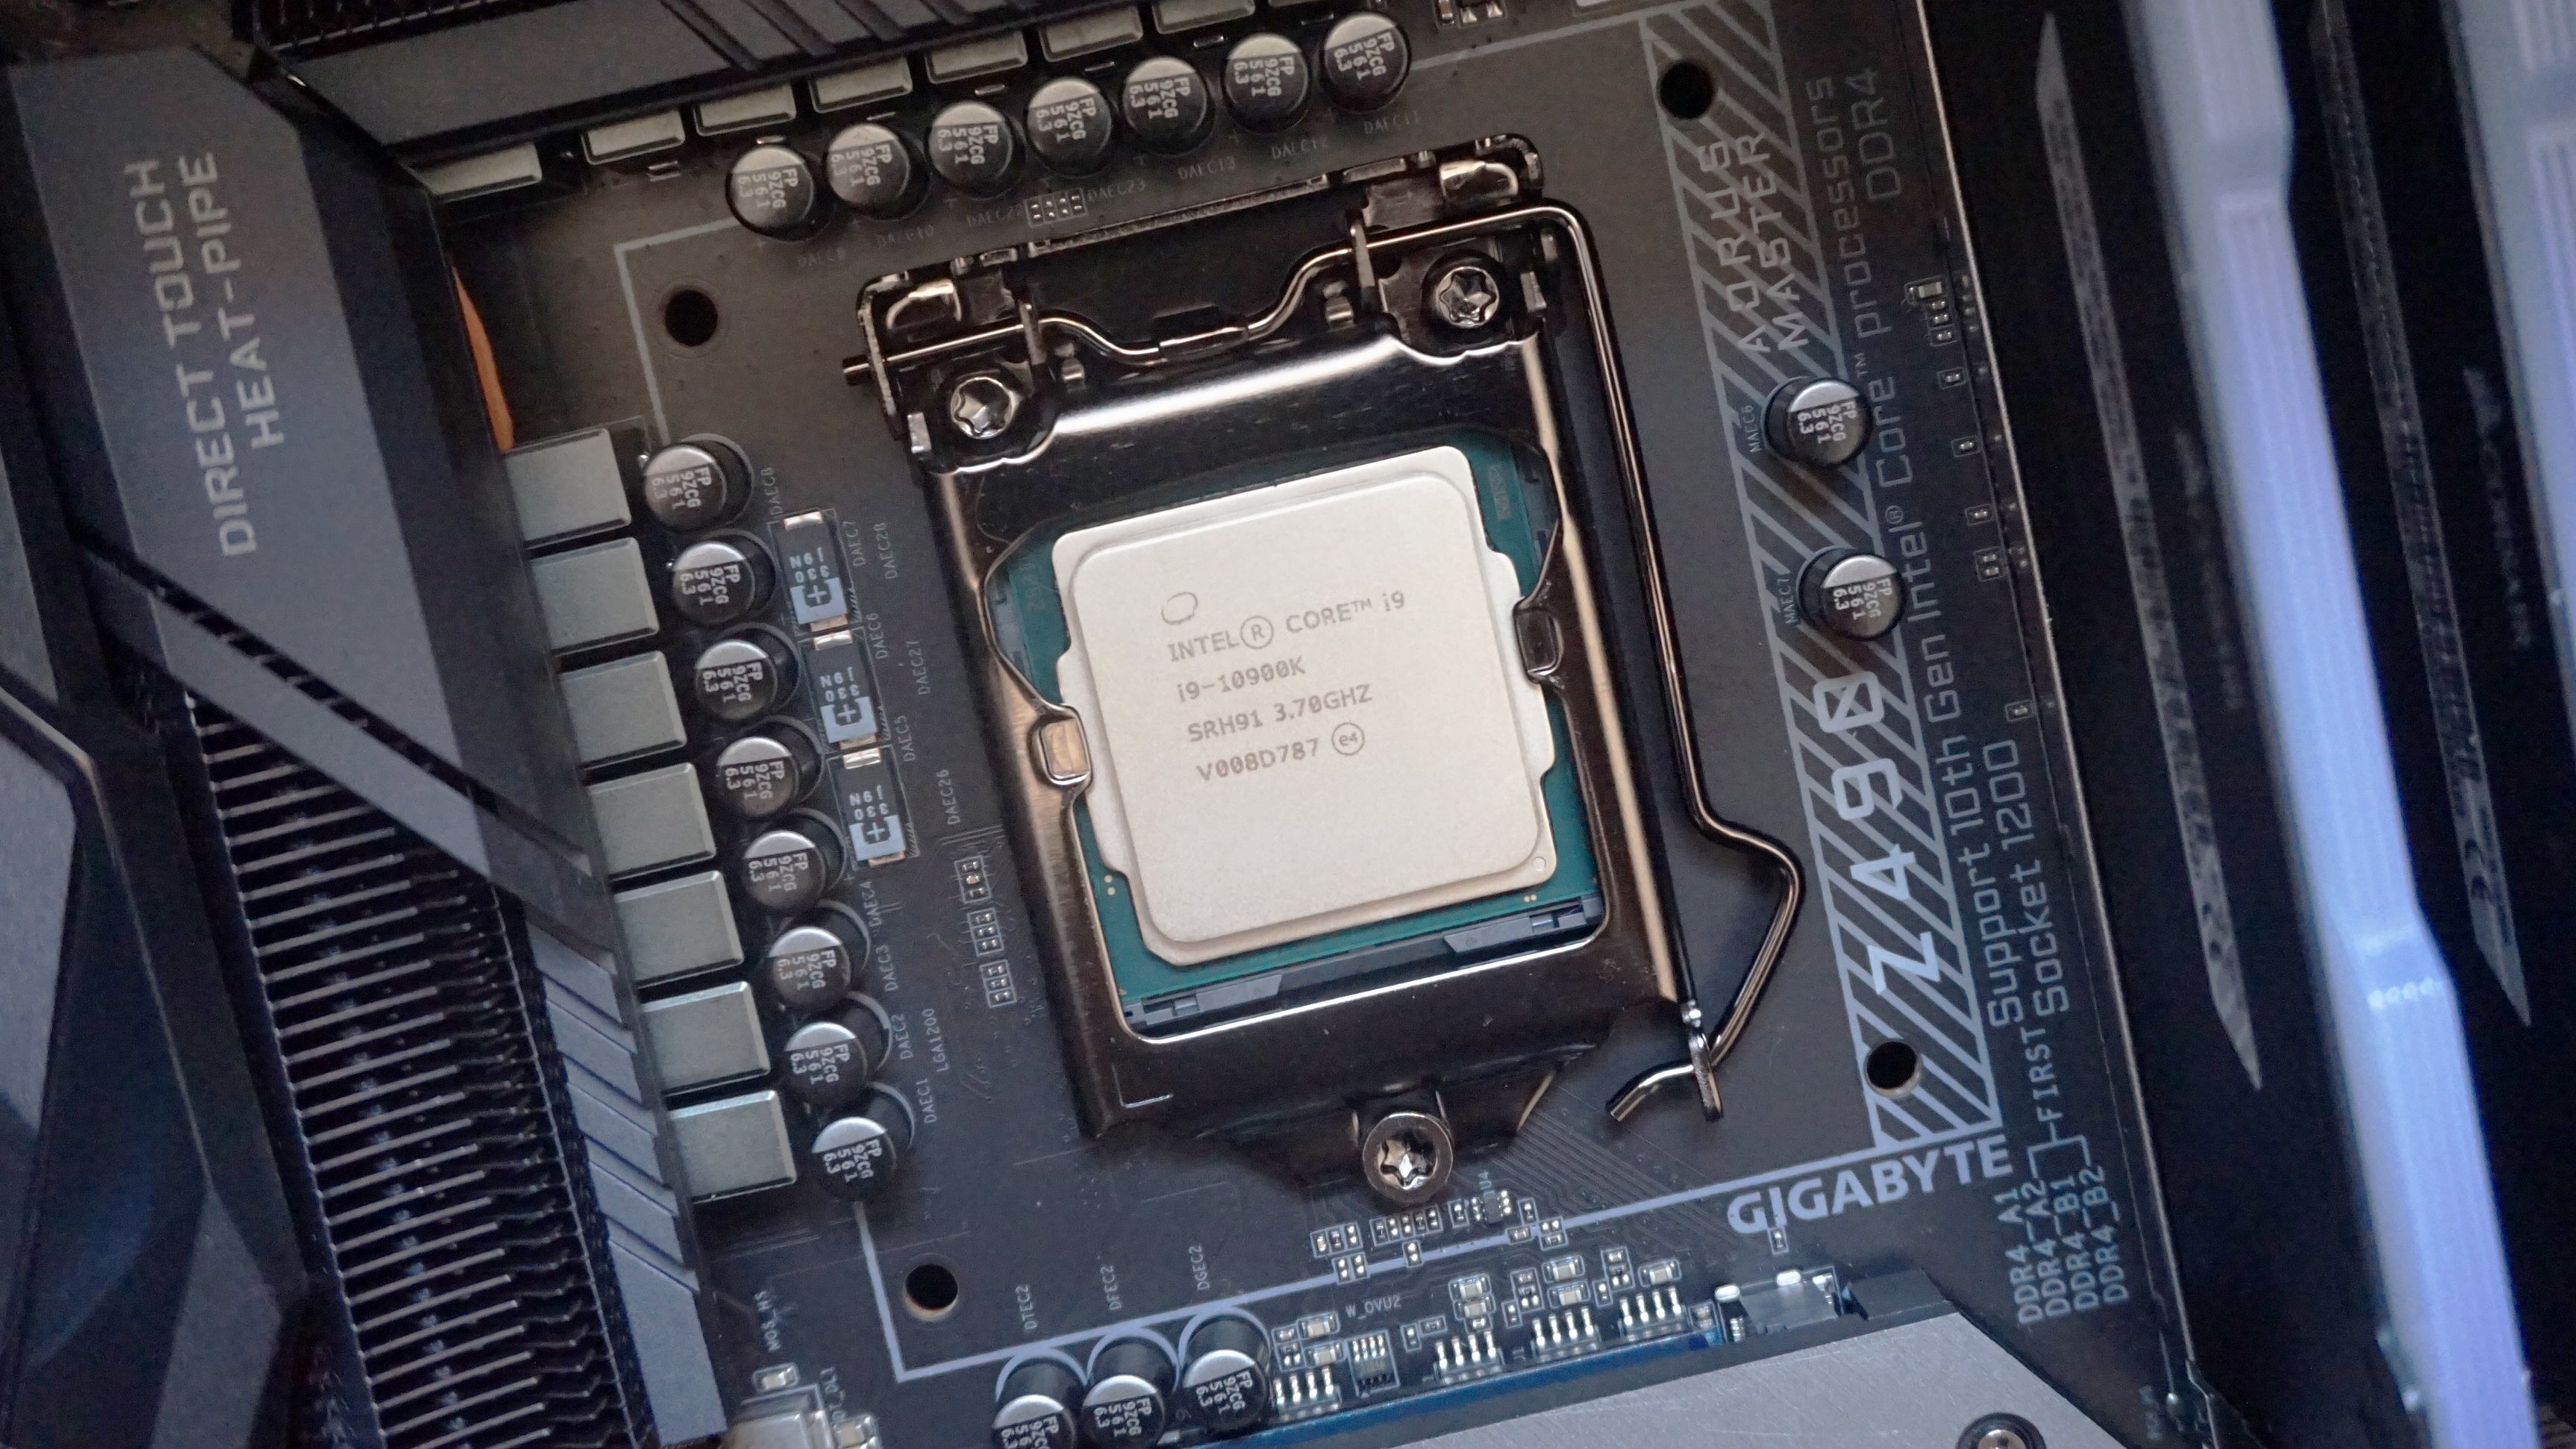 Intel Core i9-10900K CPU Overclocked & Benchmarked at 5.4 GHz